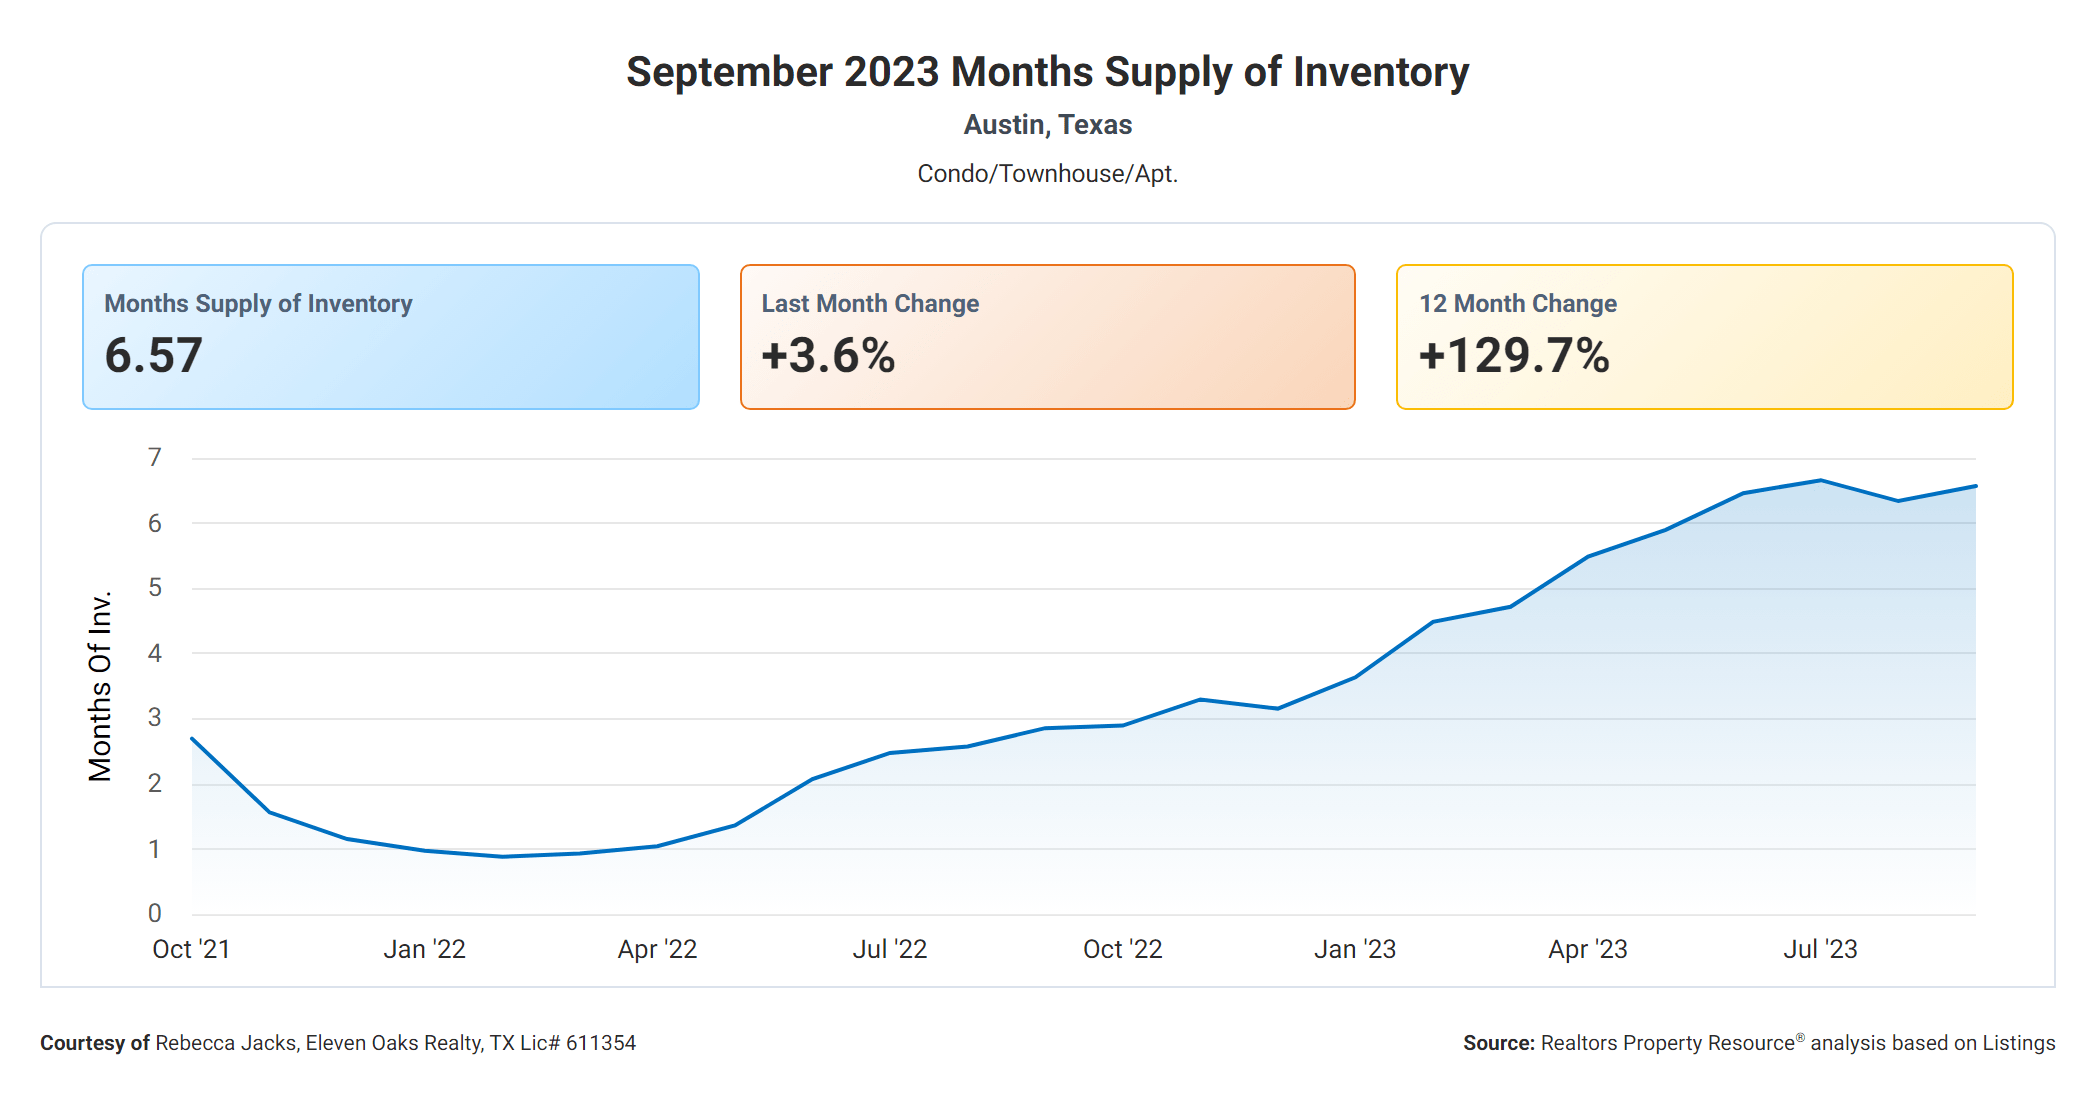 September 2023 austin tx months supply of inventory